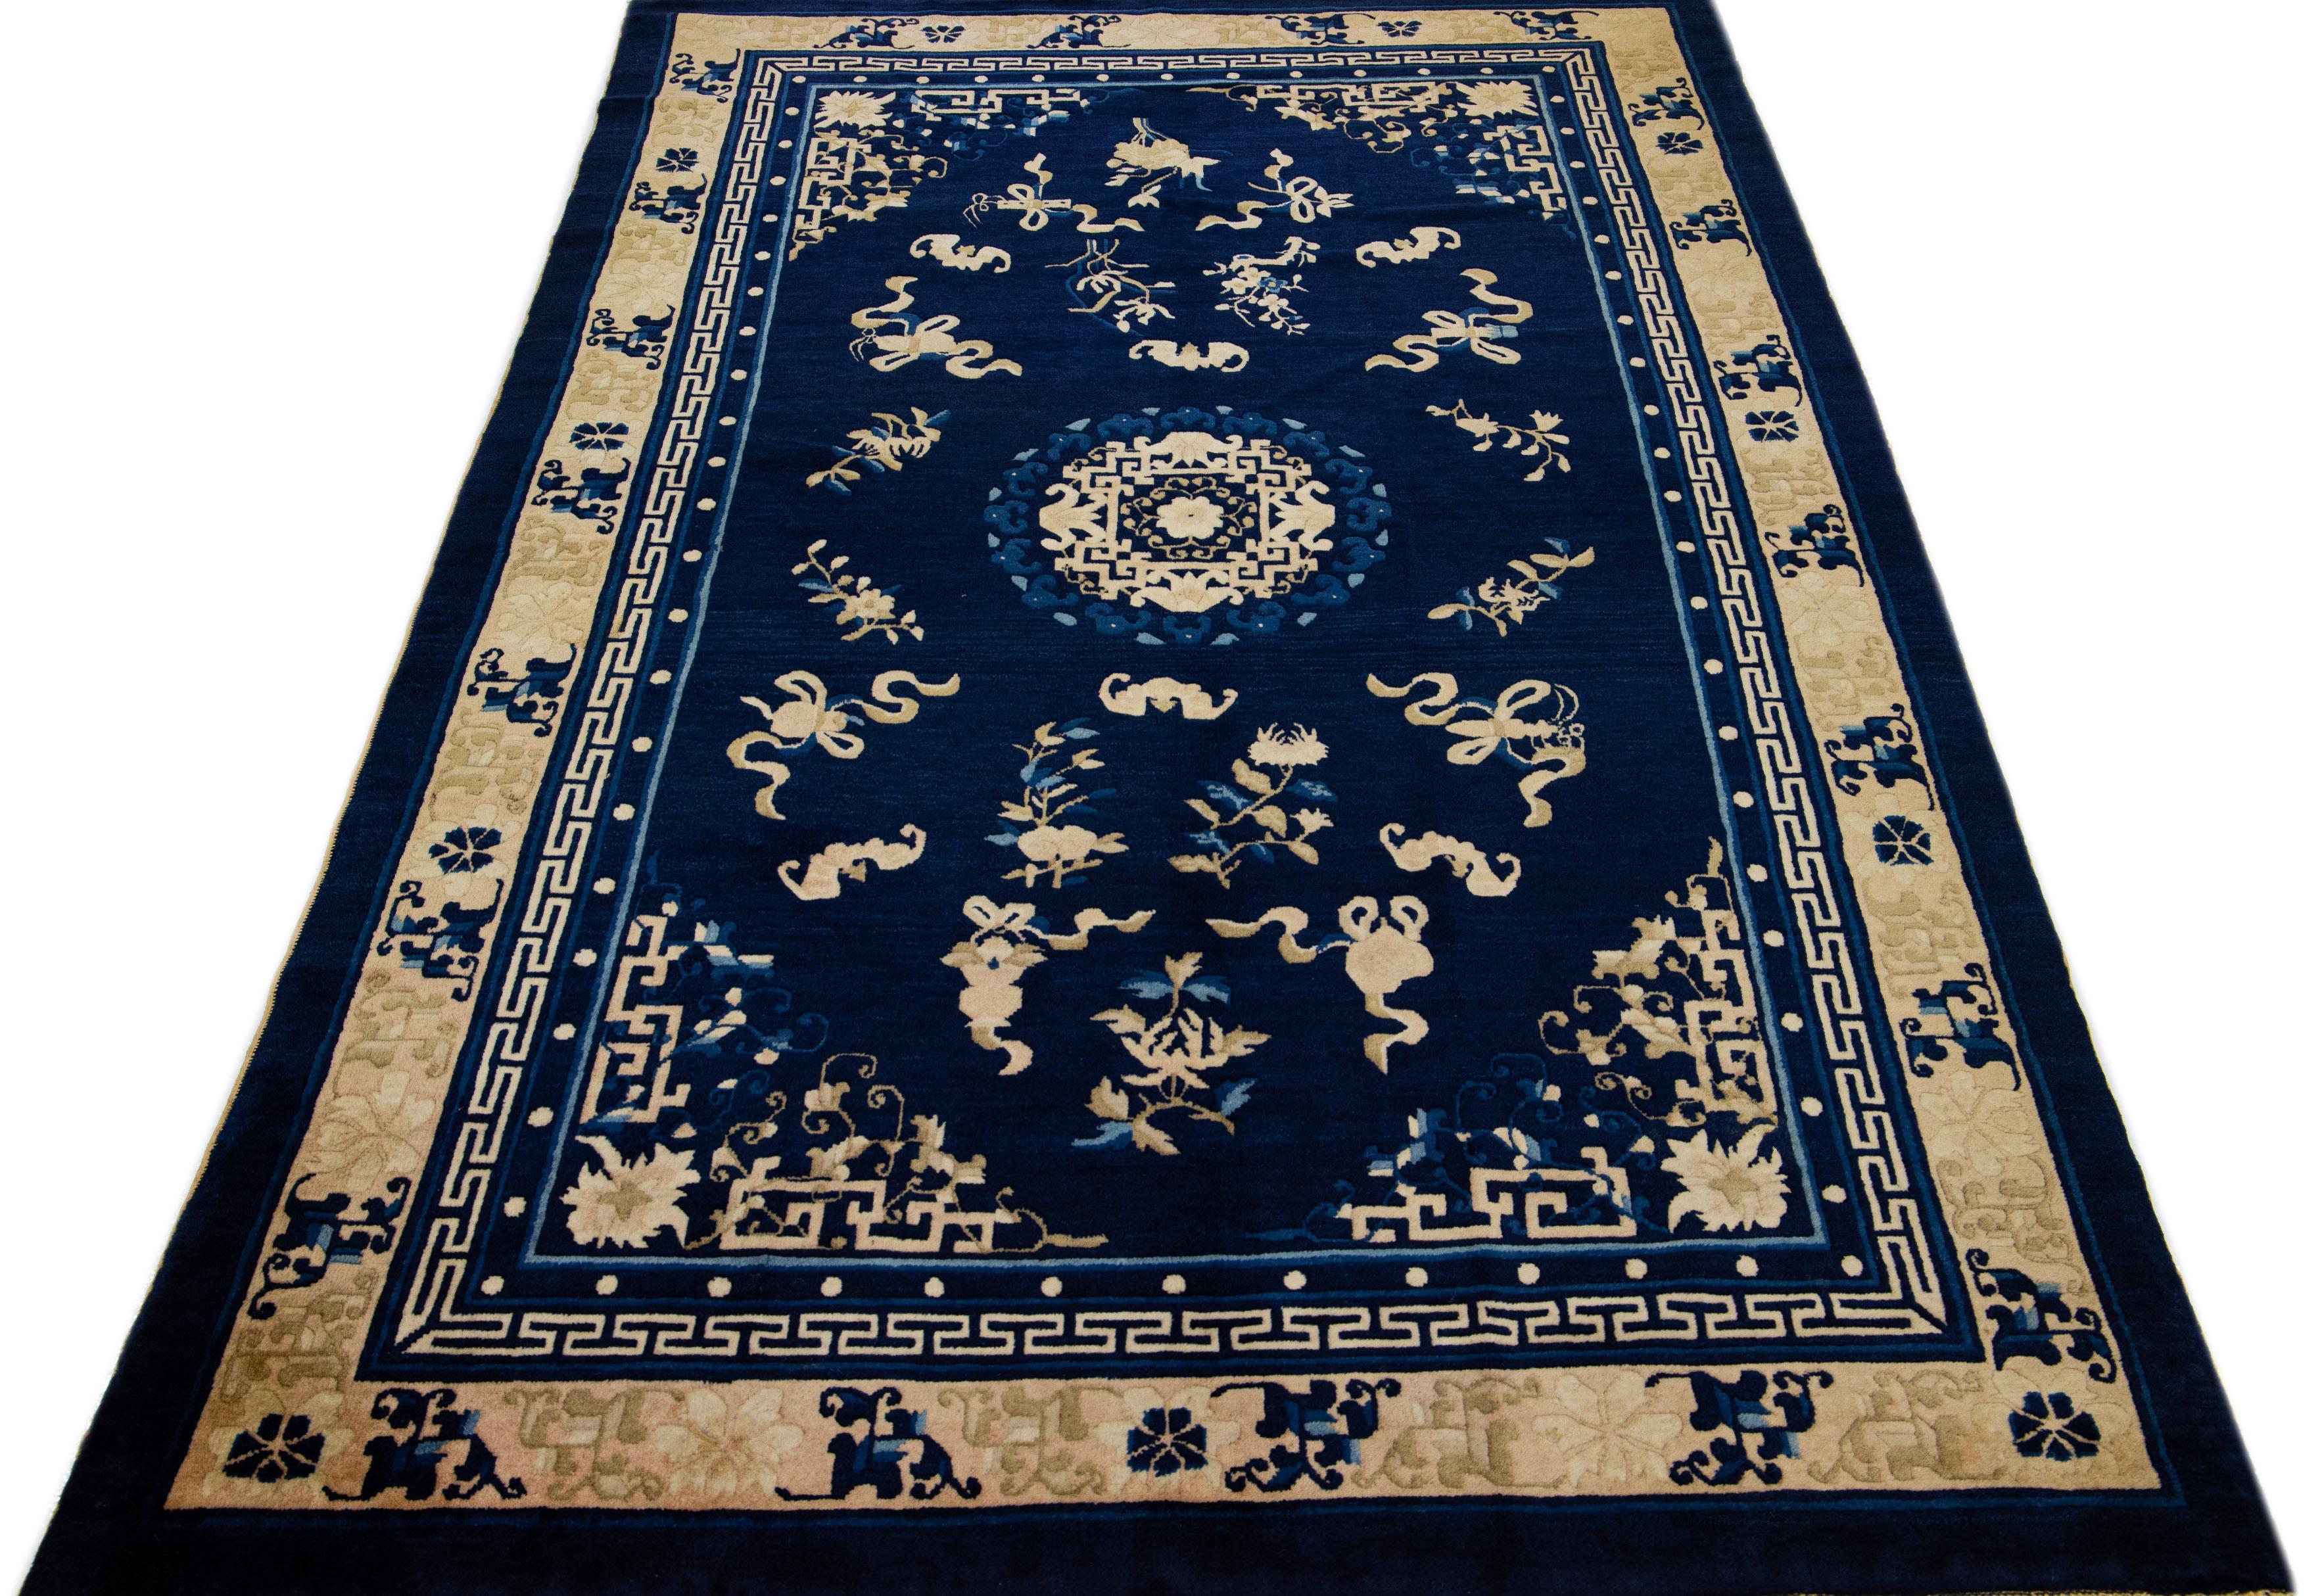 This luxurious antique Peking Chinese hand knotted wool rug features a navy blue field adorned with a designed frame and golden accents in a stunning all-over Chinese floral motif.

This rug measures: 5'1